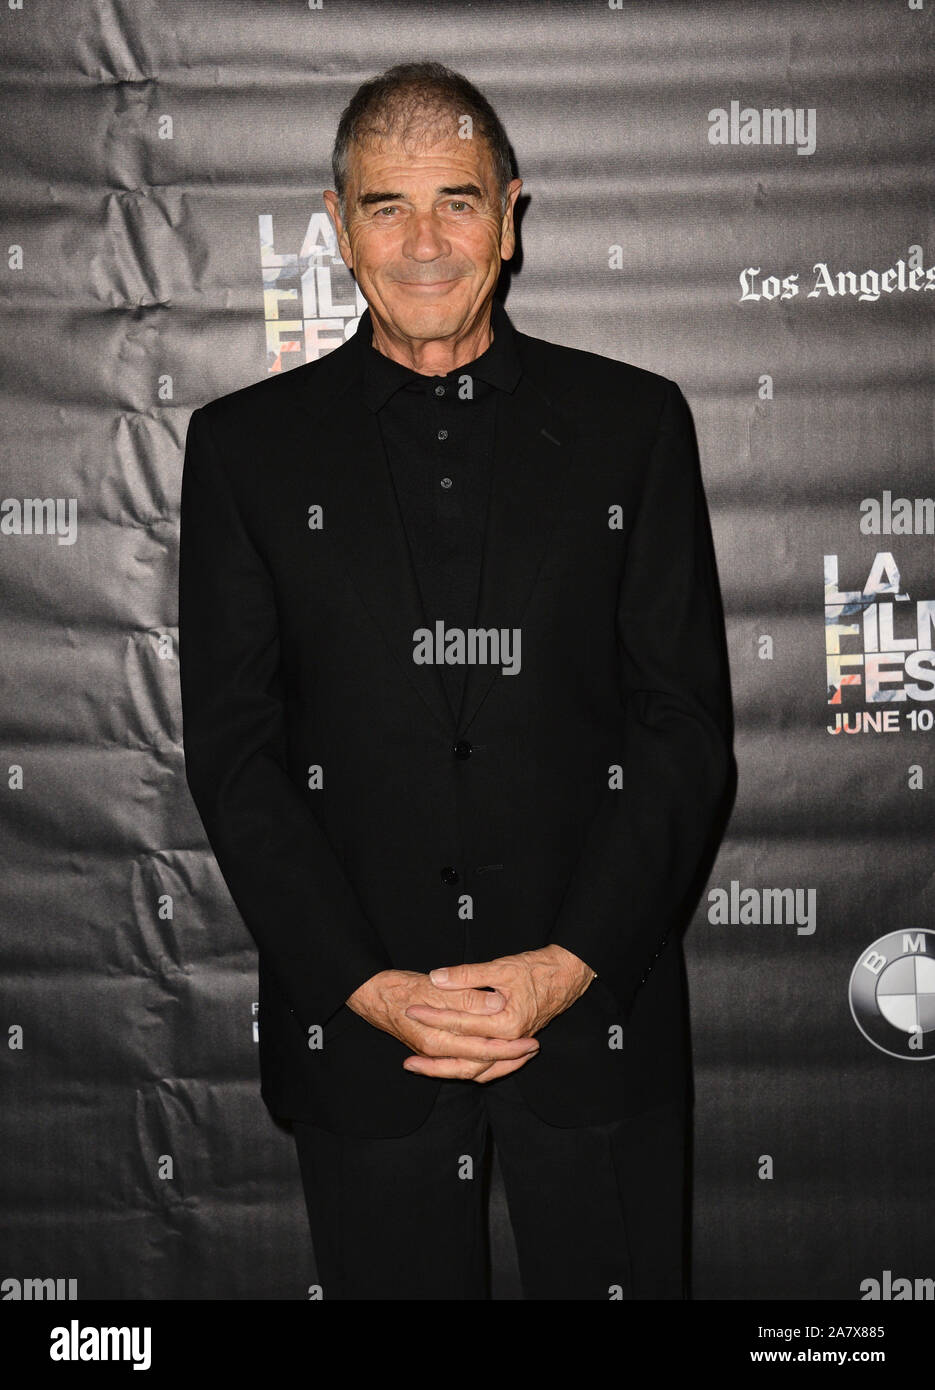 LOS ANGELES, CA. June 11, 2015: Robert Forester at the premiere of "Too Late", part of the LA Film Festival, at the Bing Theatre at LACMA. © 2015 Paul Smith / Featureflash Stock Photo